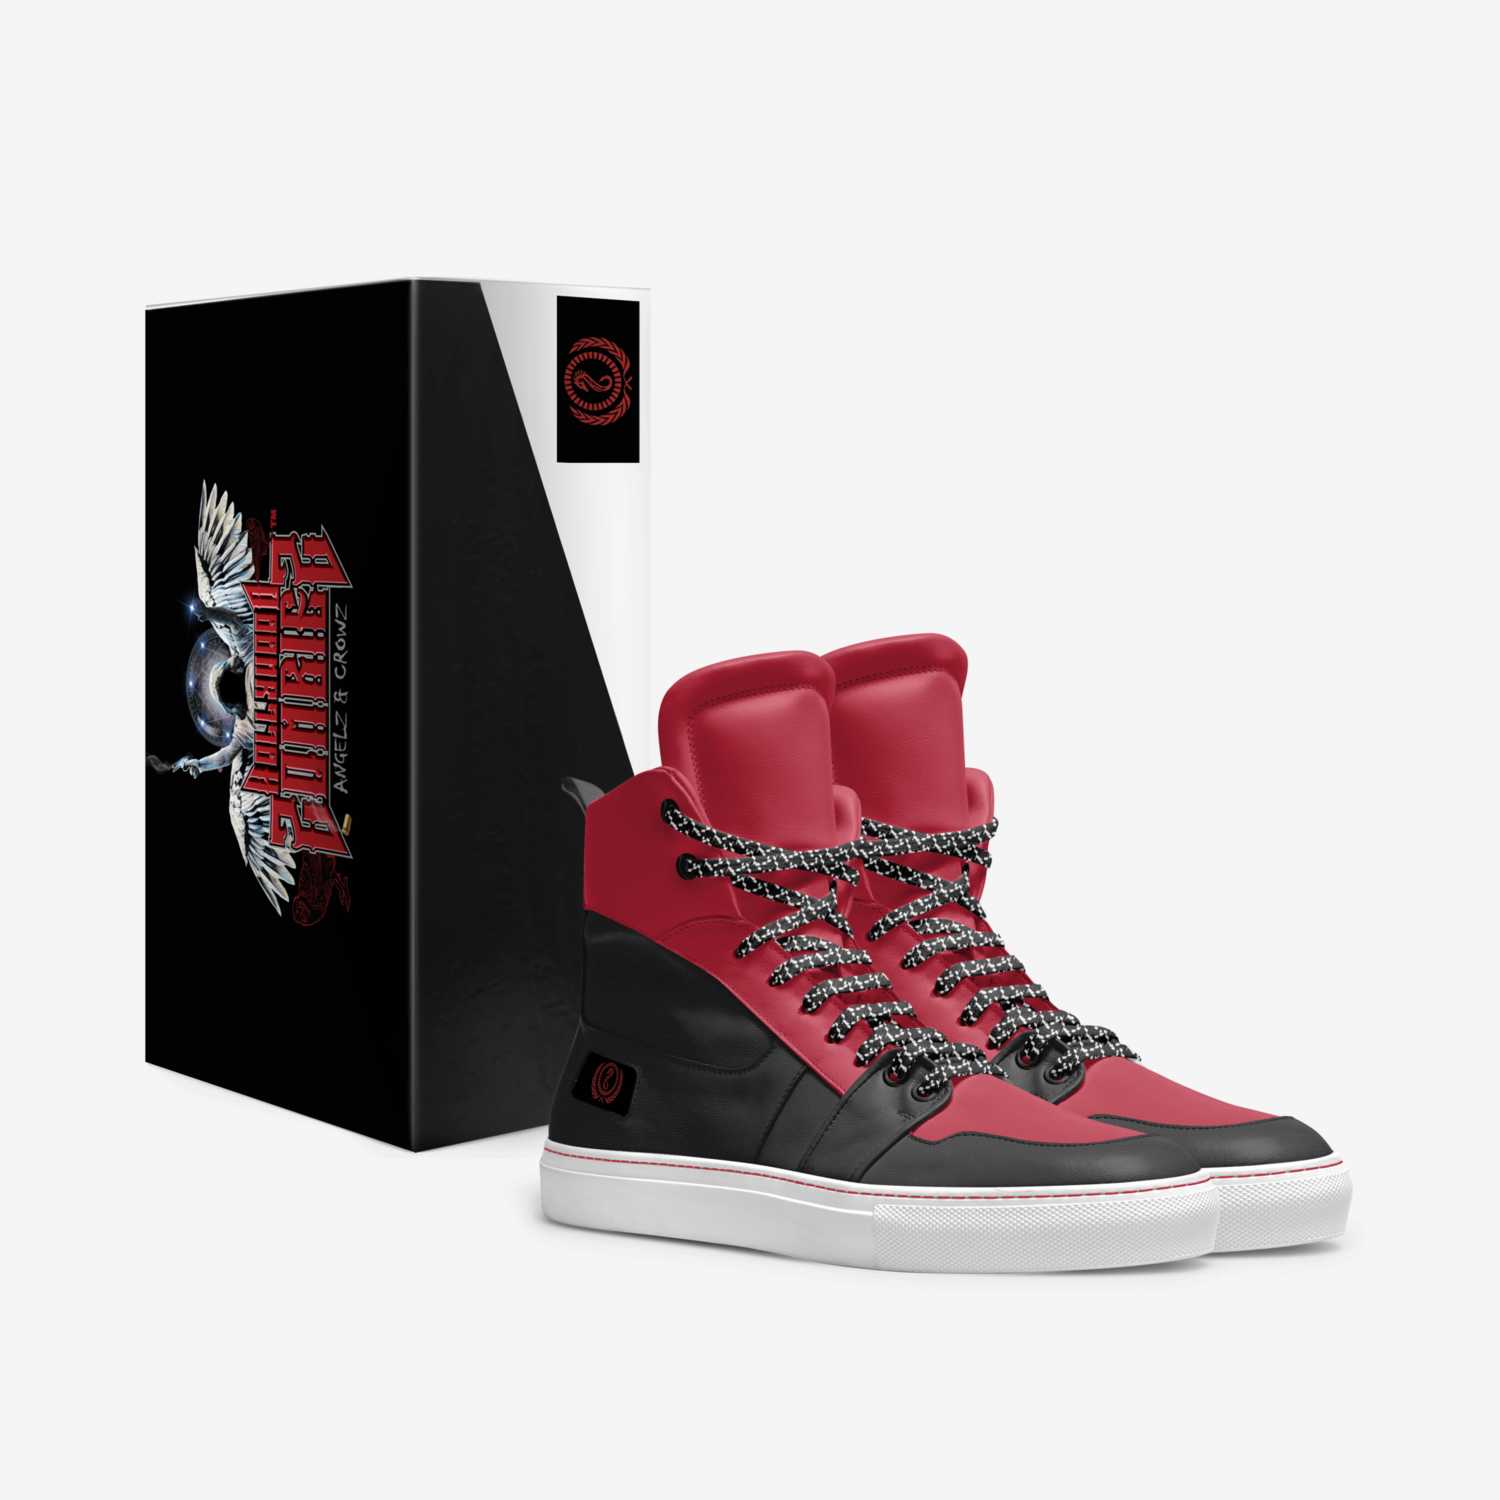 Grave Walkerz custom made in Italy shoes by Hudson Redwater | Box view